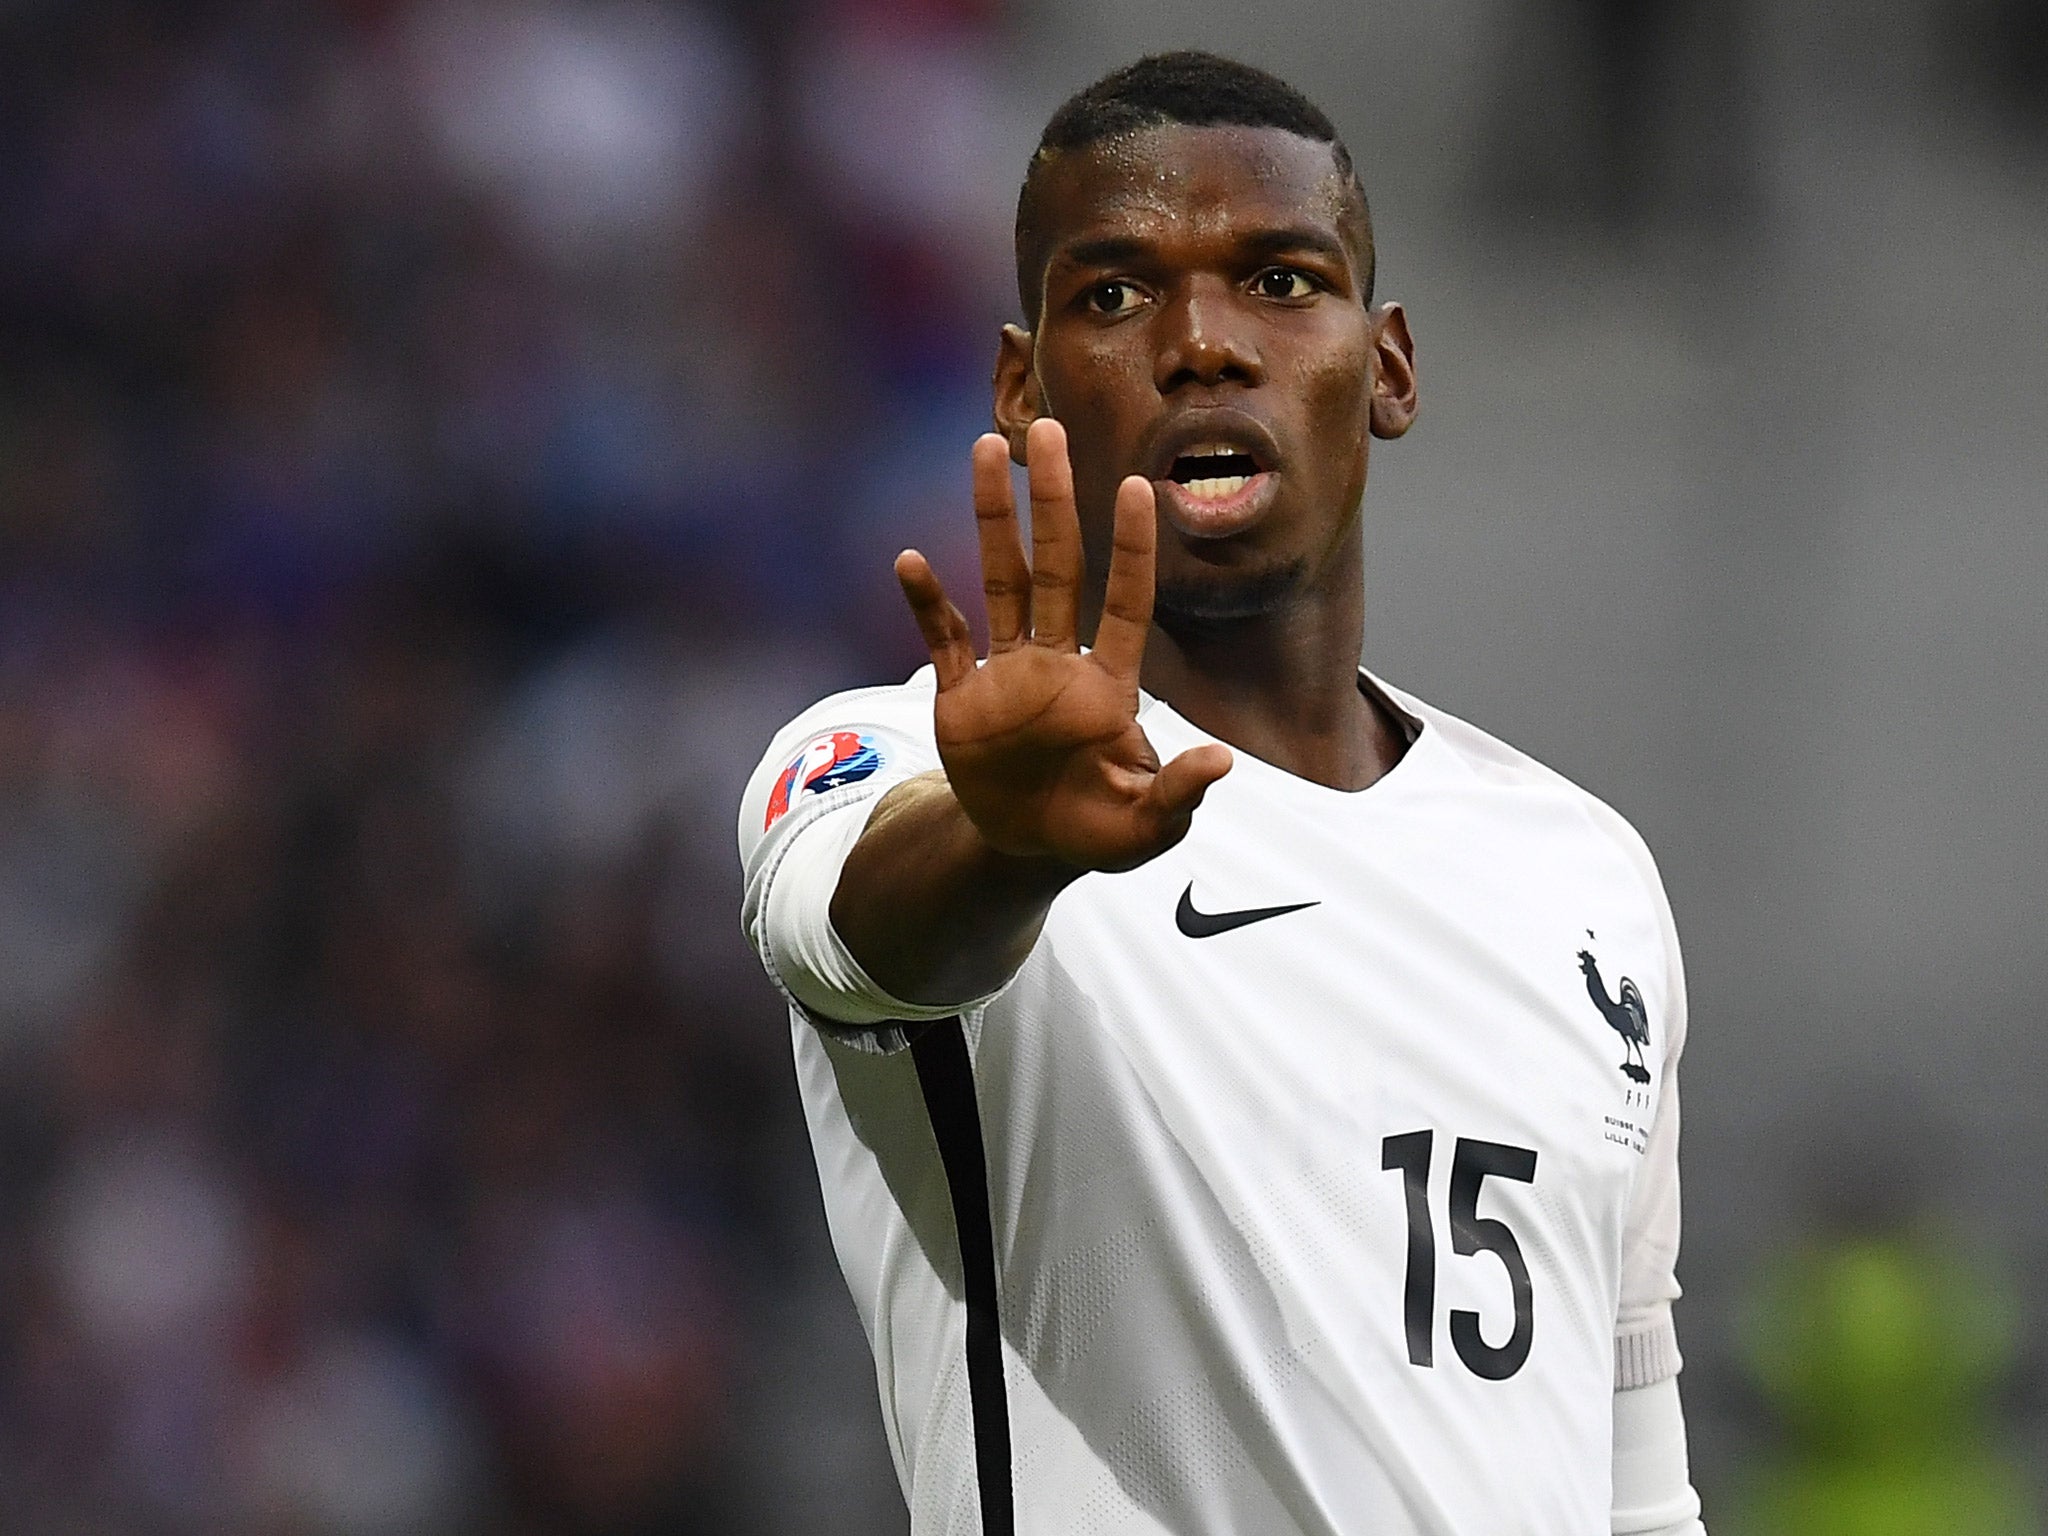 Paul Pogba could join Manchester United 'within 48 hours', according to reports